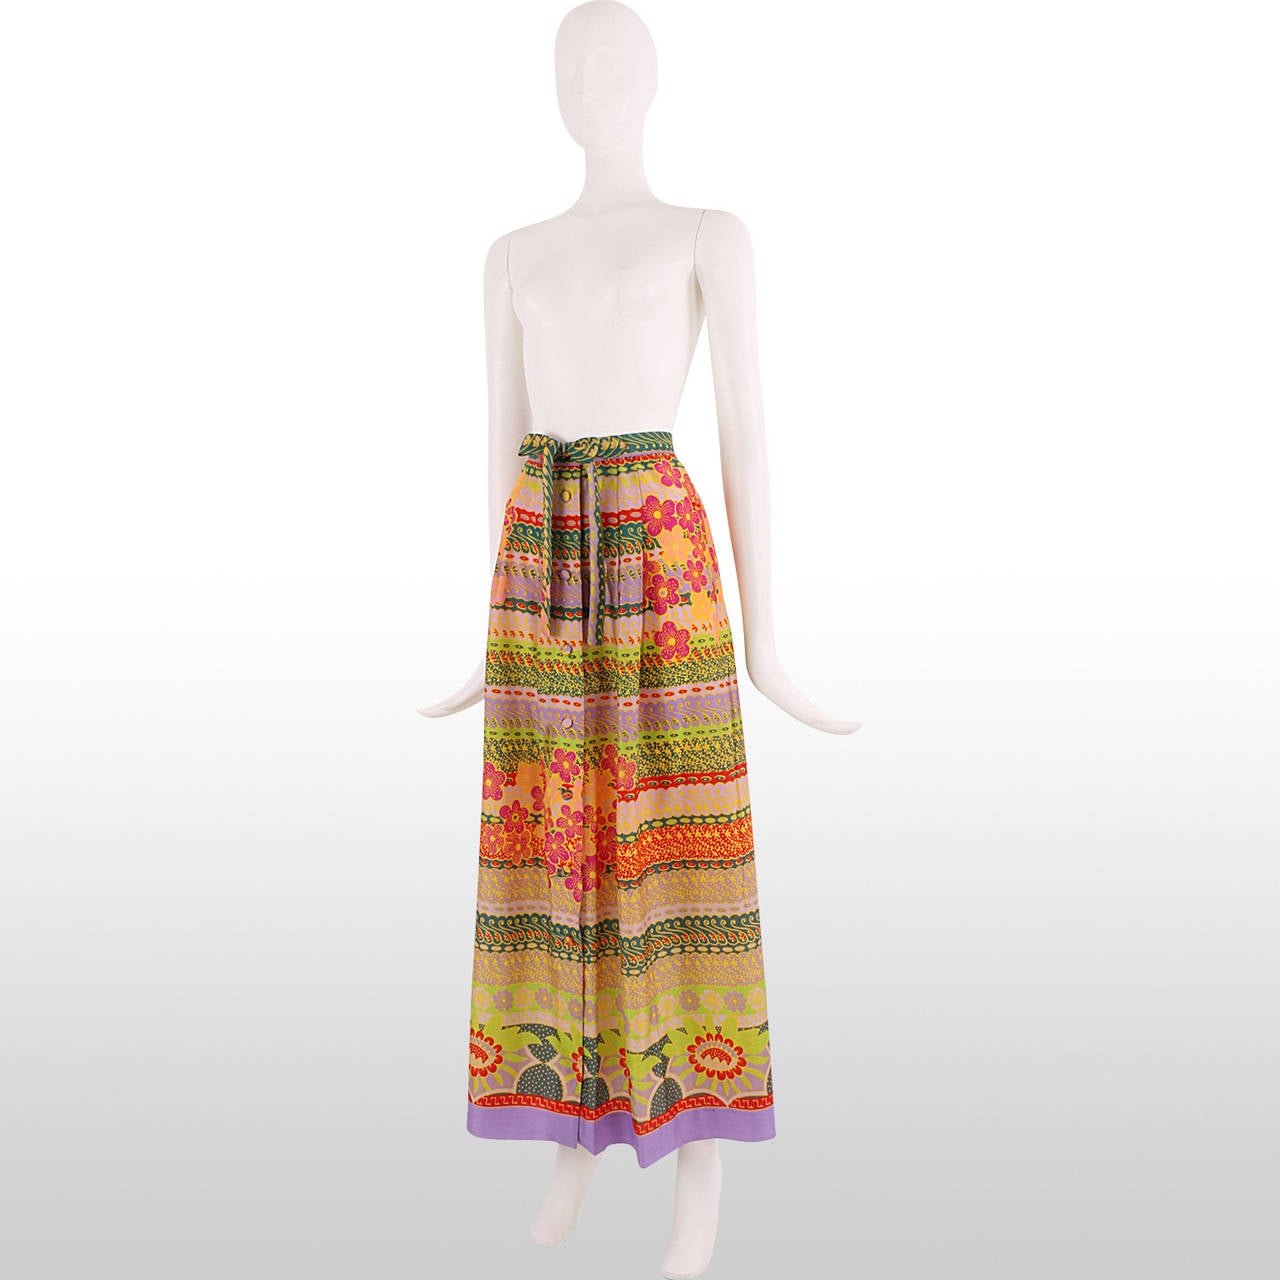 Vibrant 1970's maxi skirt from original designer J. Tiktiner for Harrods. The skirt features a fun tropical and floral print with psychedelic style swirls, making the piece really pop. The skirt also features a button down centre and tie waist,